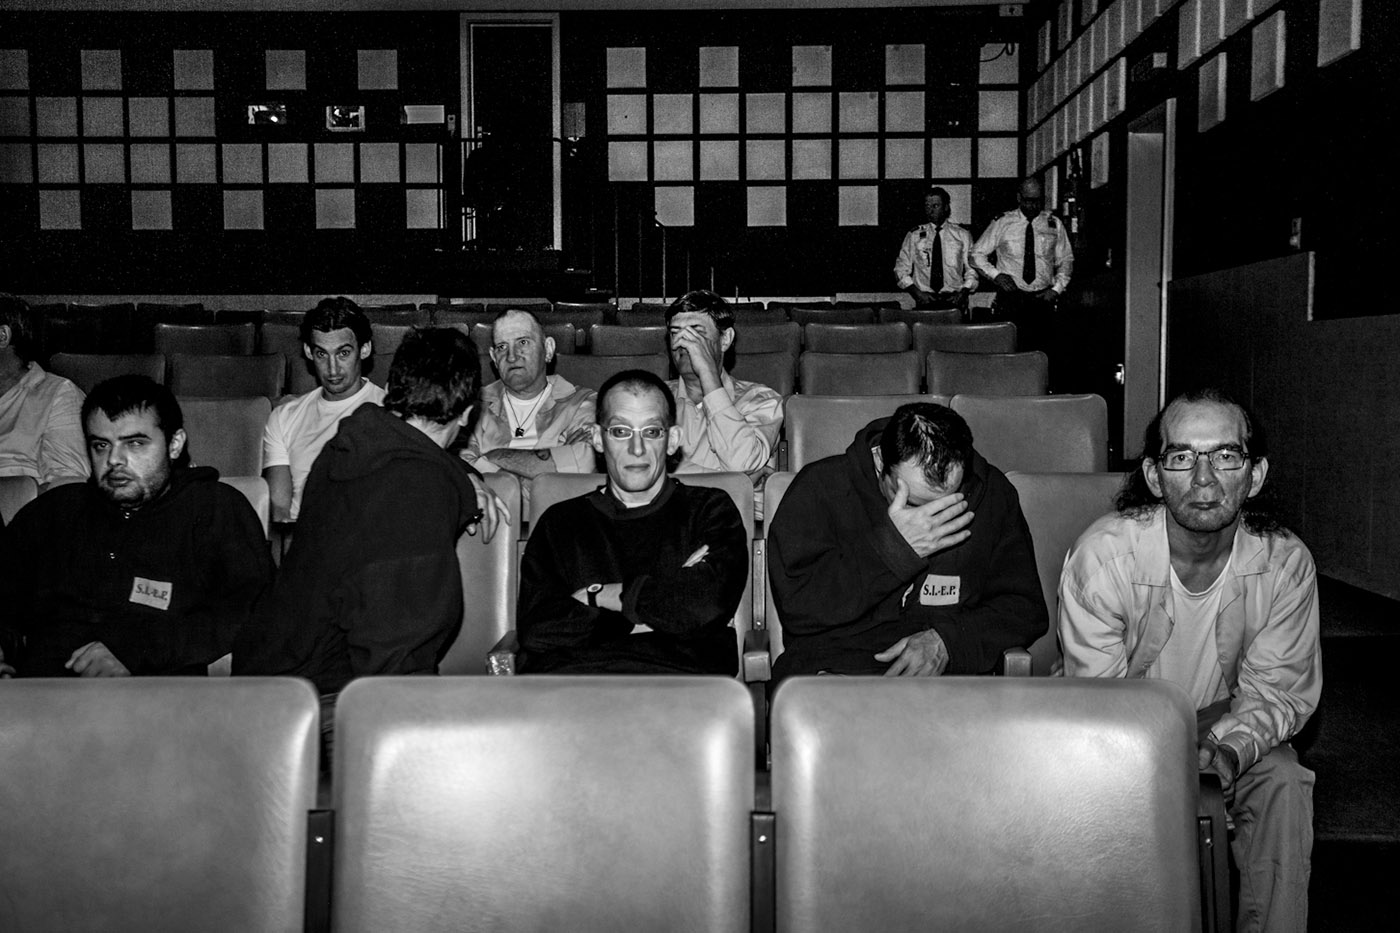 Prisoners watching a movie inside the movie theatre of the prison of Ghent, Belgium, April 2014.